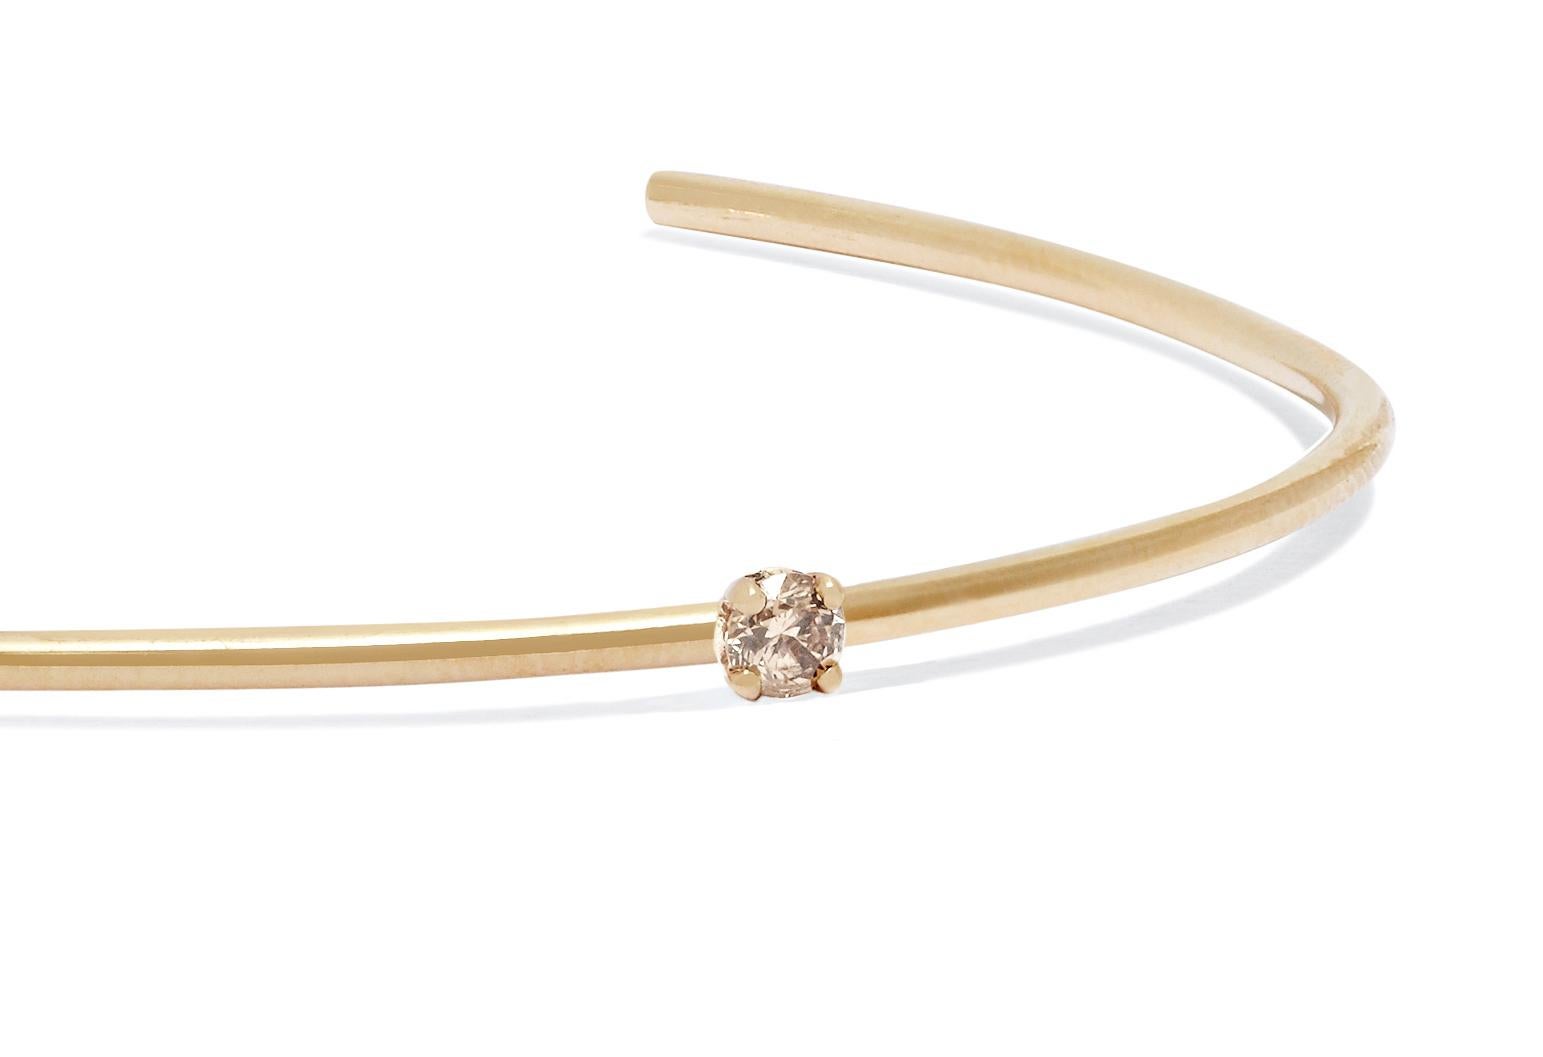 Clean-lined and elegant, this solid 18-carat yellow gold cuff features a champagne diamond set to sparkle at the wrist bone.  Diamond measures approximately 3 mm; 0.06 total carat weight. 

Handmade in London. Hallmarked 750 Allison Bryan London. 